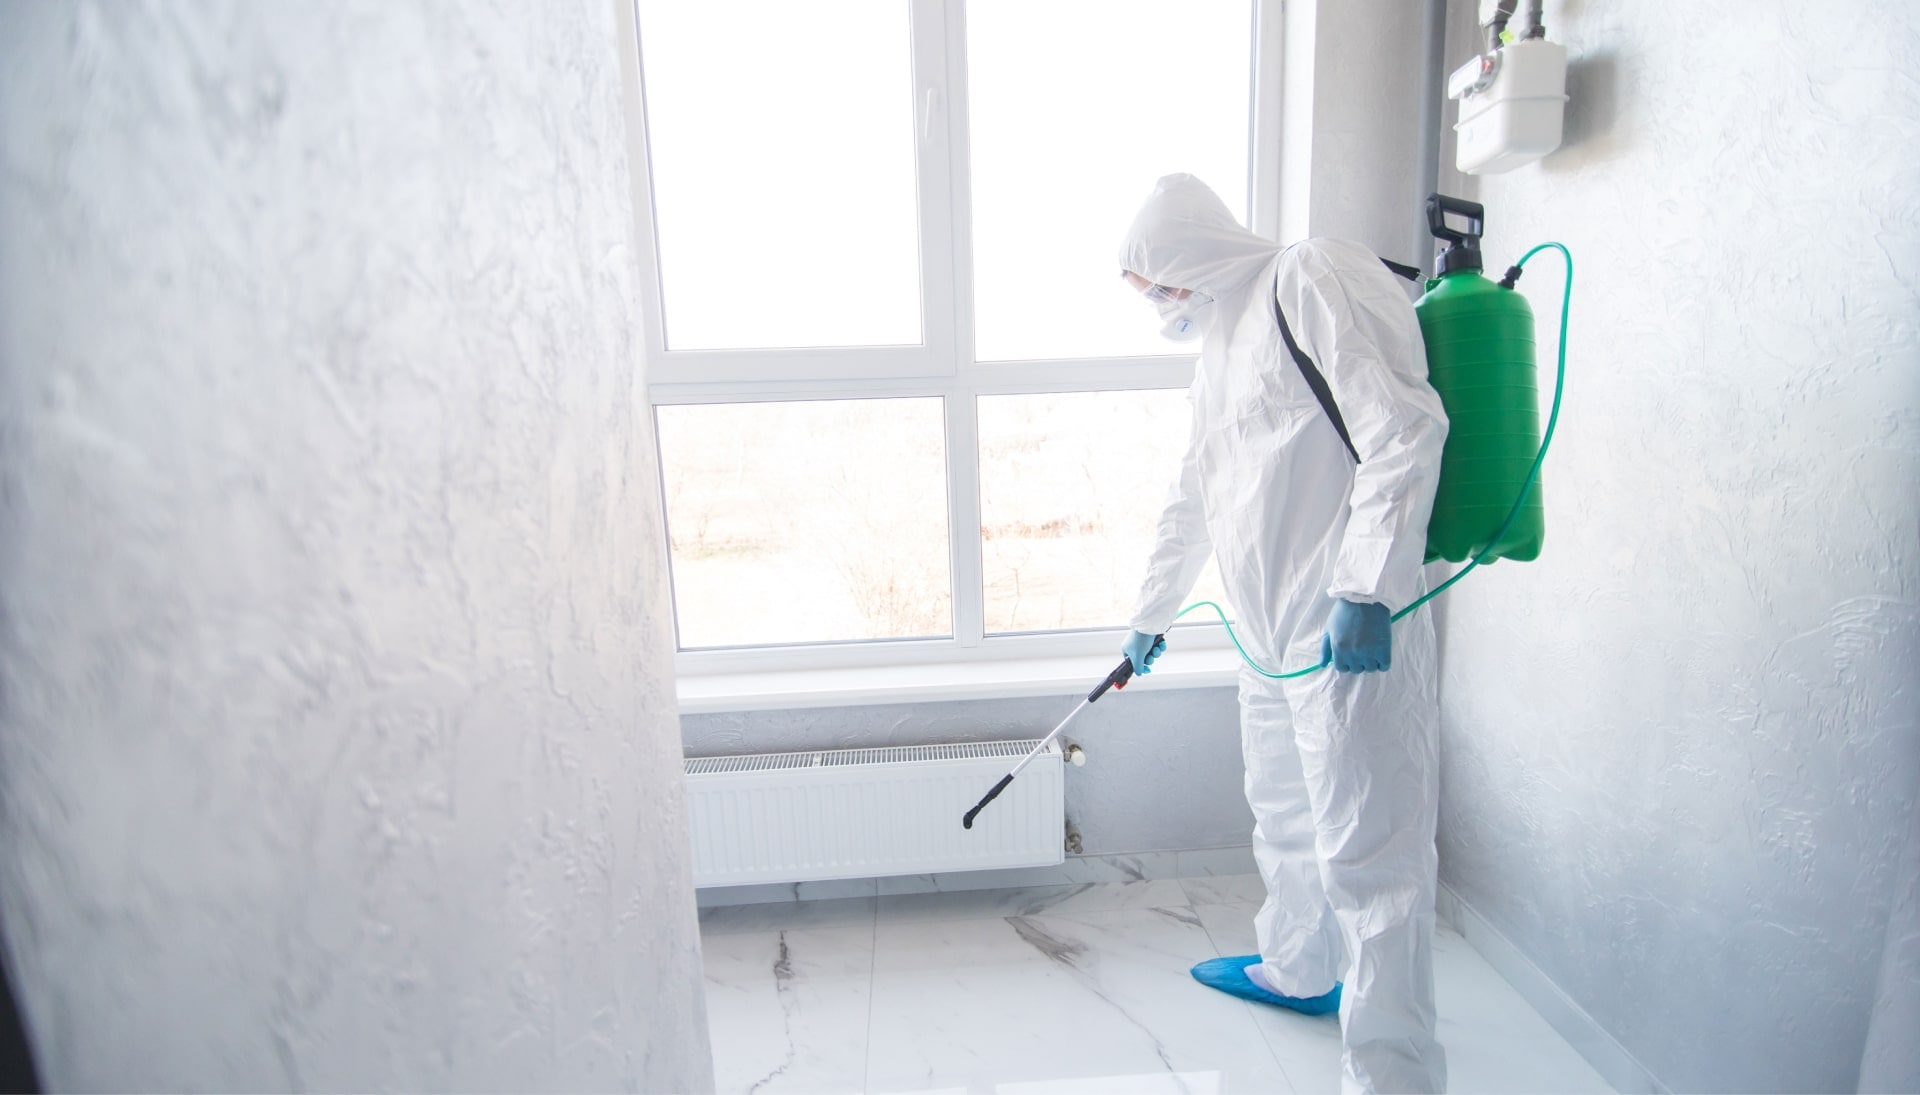 We provide the highest-quality mold inspection, testing, and removal services in the Indianapolis, Indiana area.